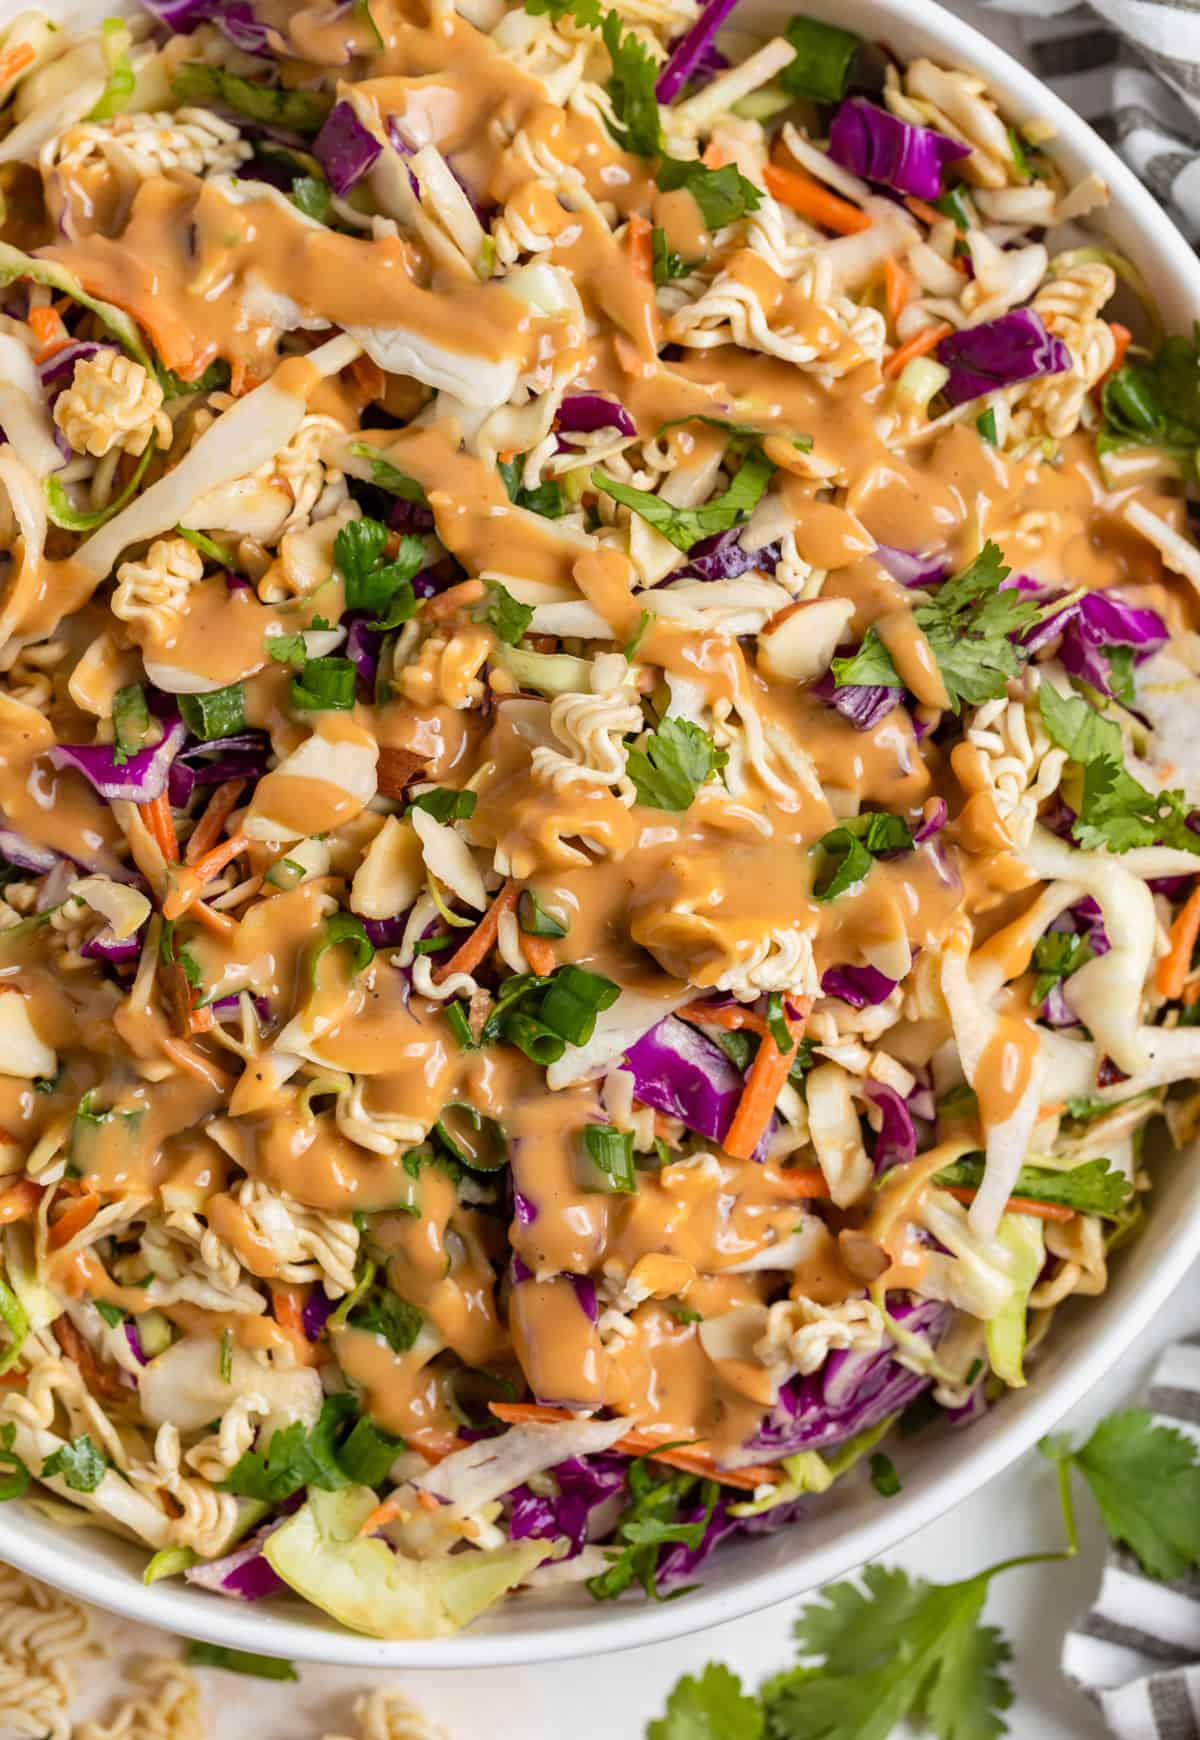 Ramen cabbage salad with peanut dressing drizzled over top.